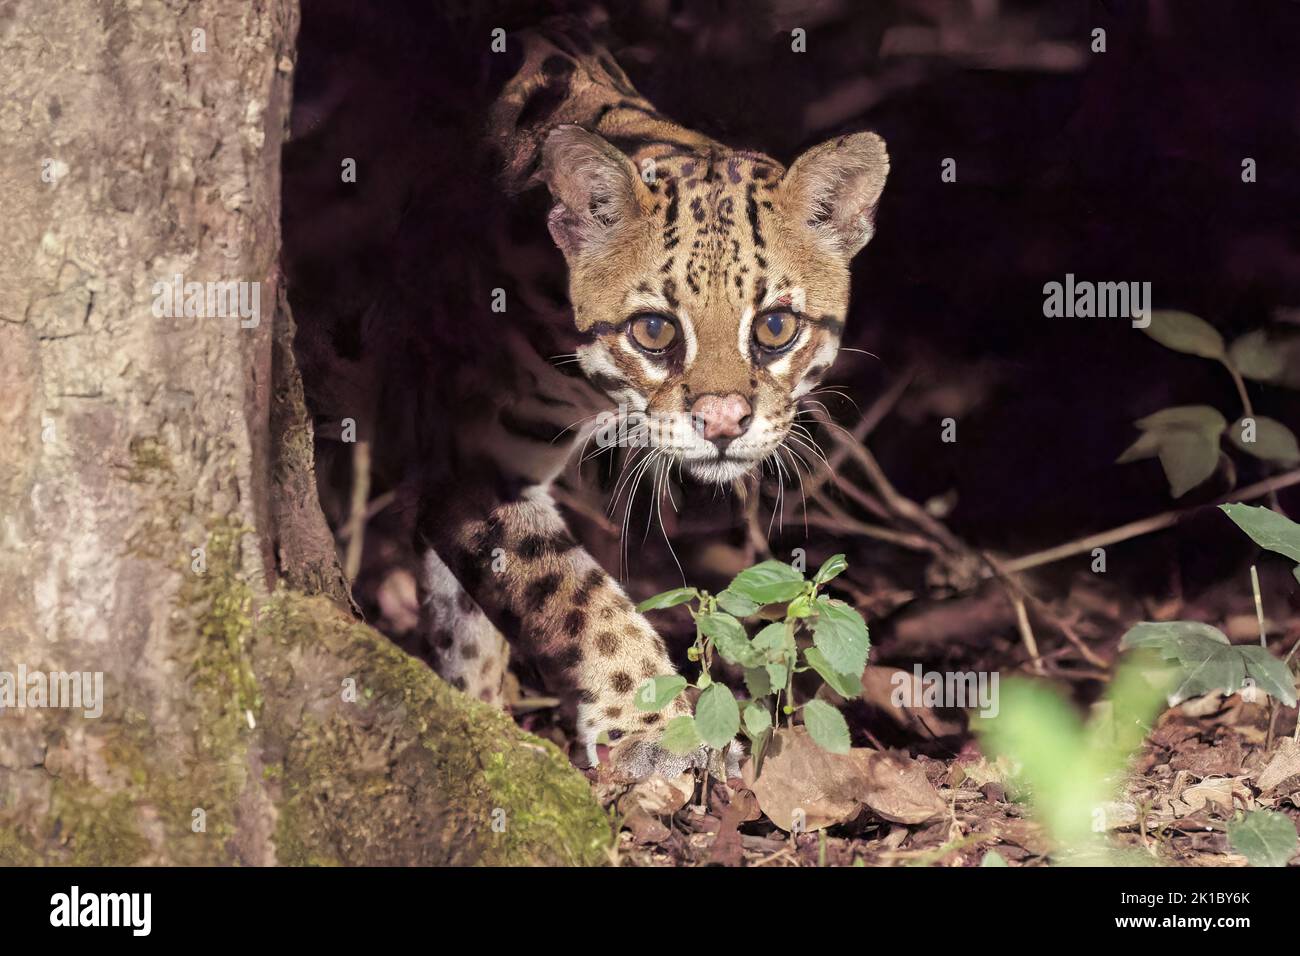 ocelot, Leopardus pardalis, close up of head of single adult hunting at night in the Pantanal, Brazil Stock Photo